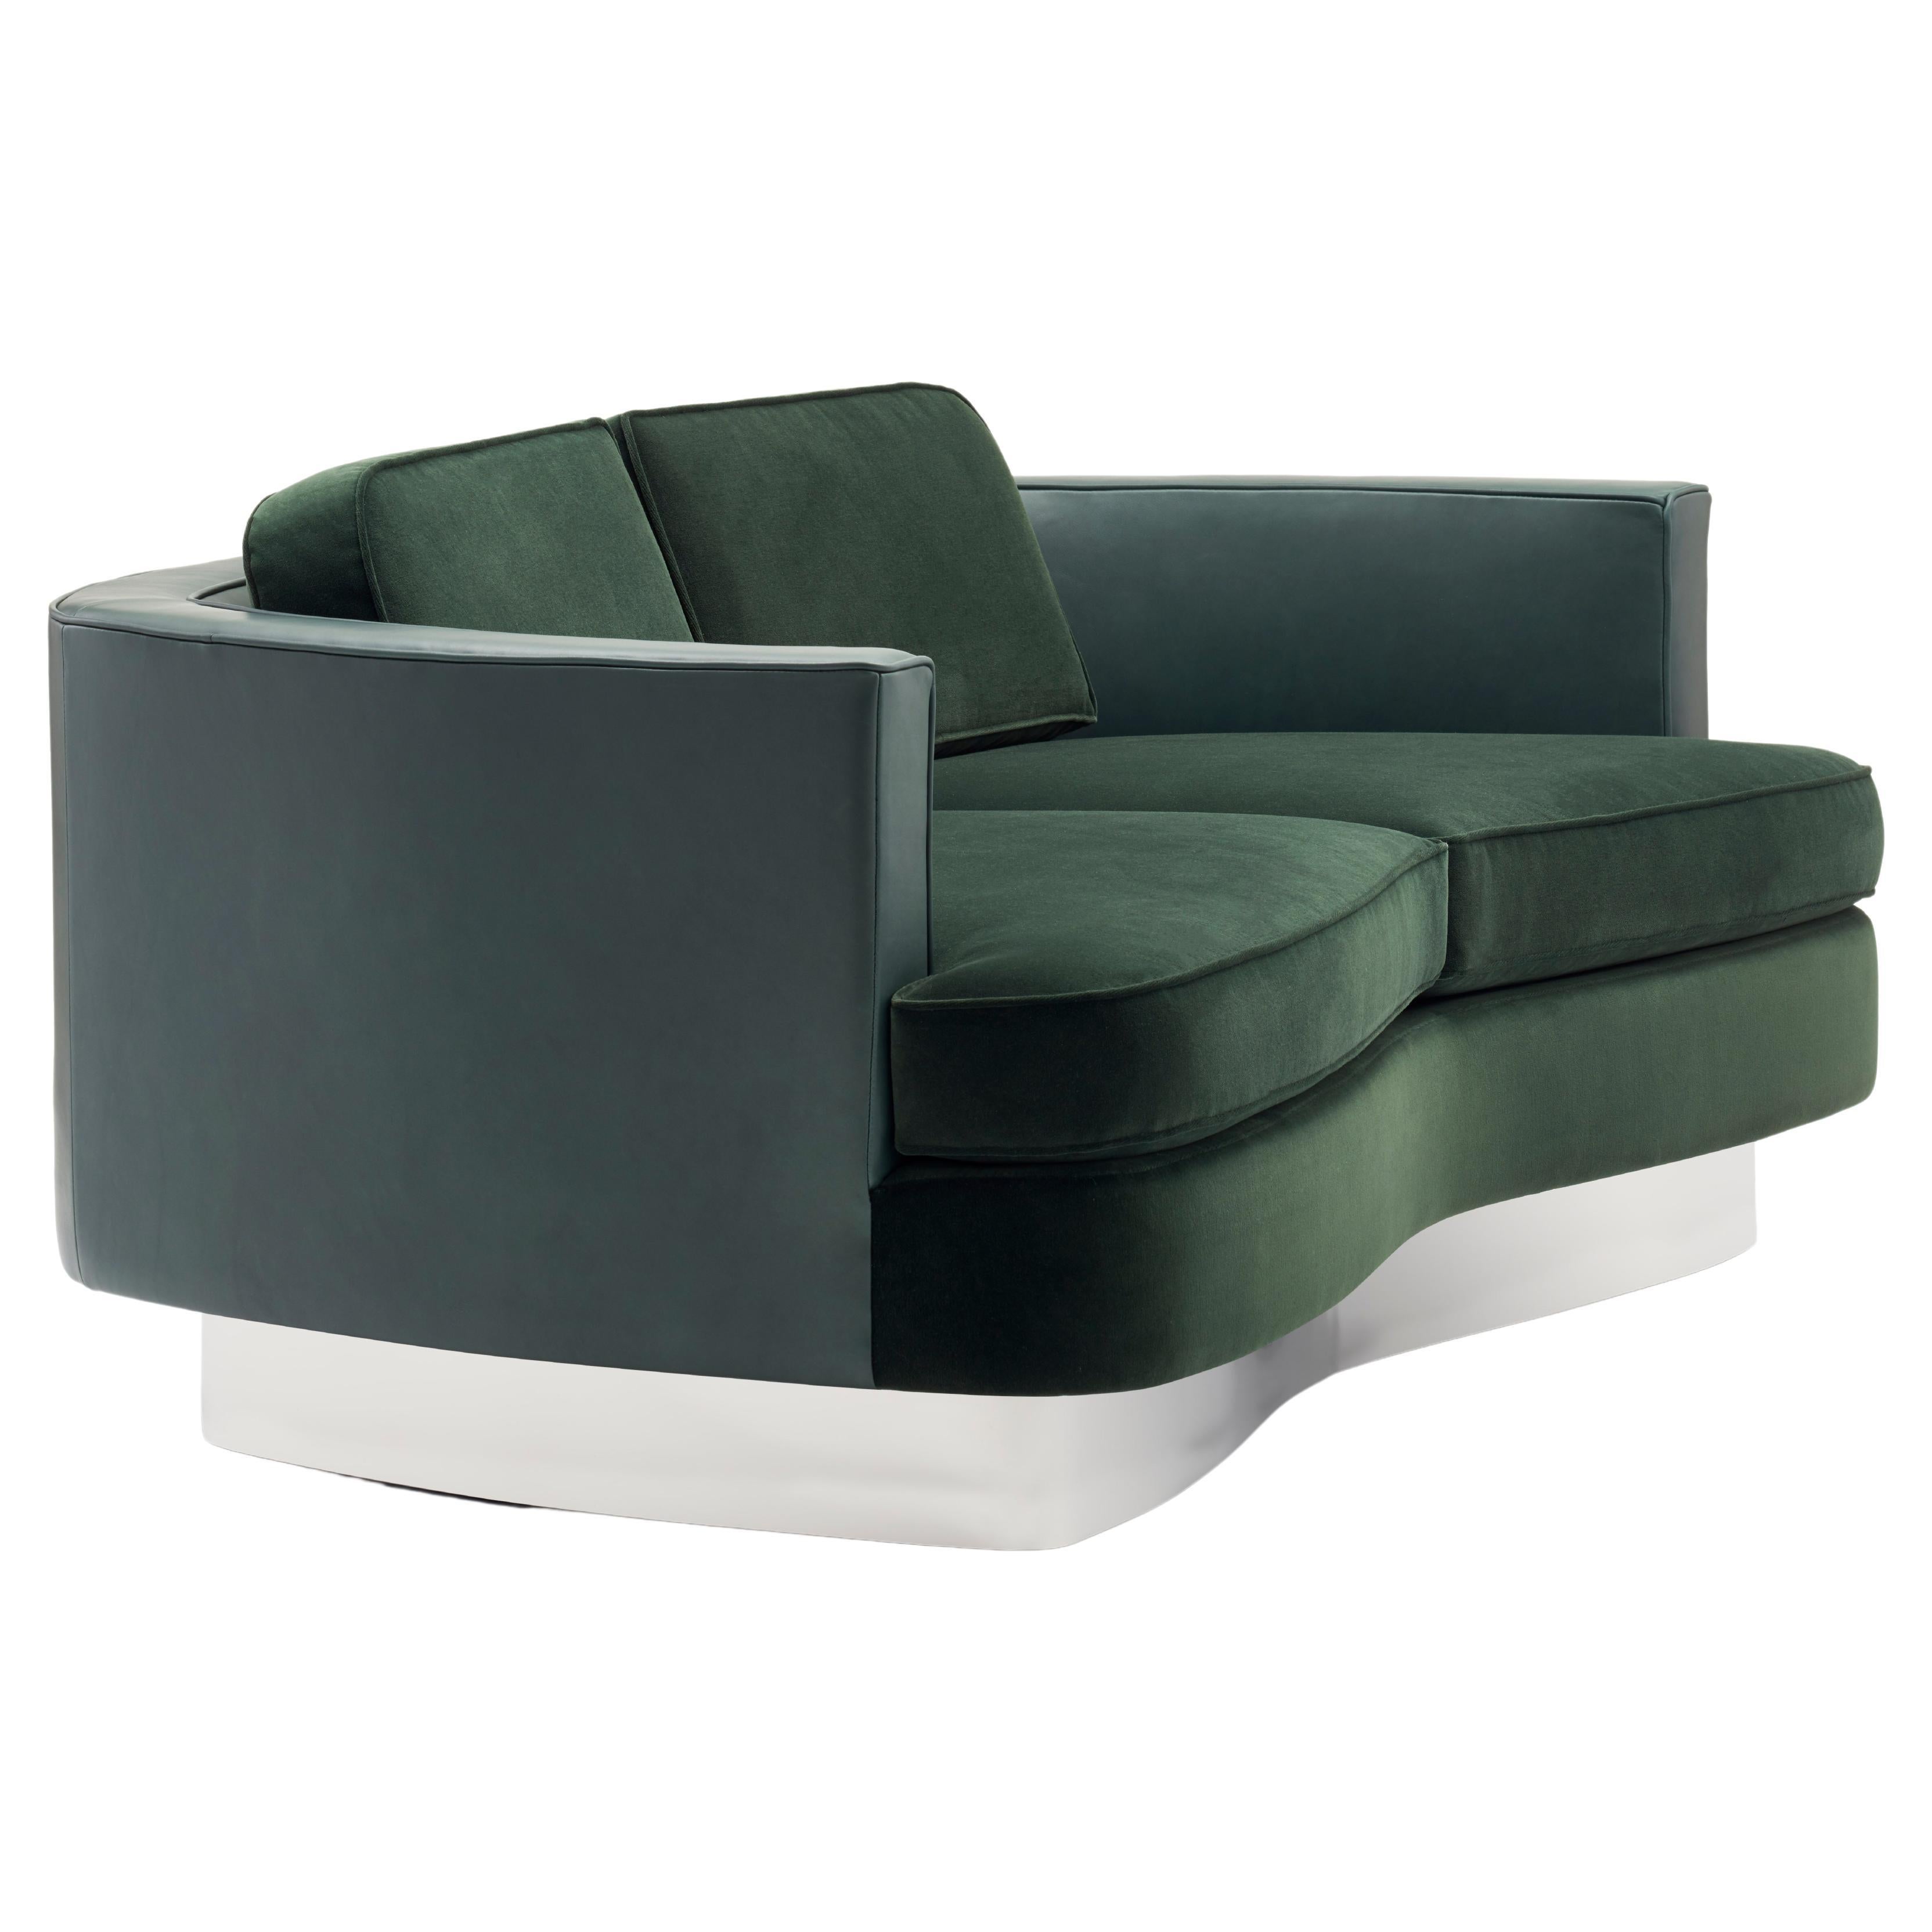 Cubist Curve Sofa 70", Upholstered Loveseat with Stainless Steel Base For Sale